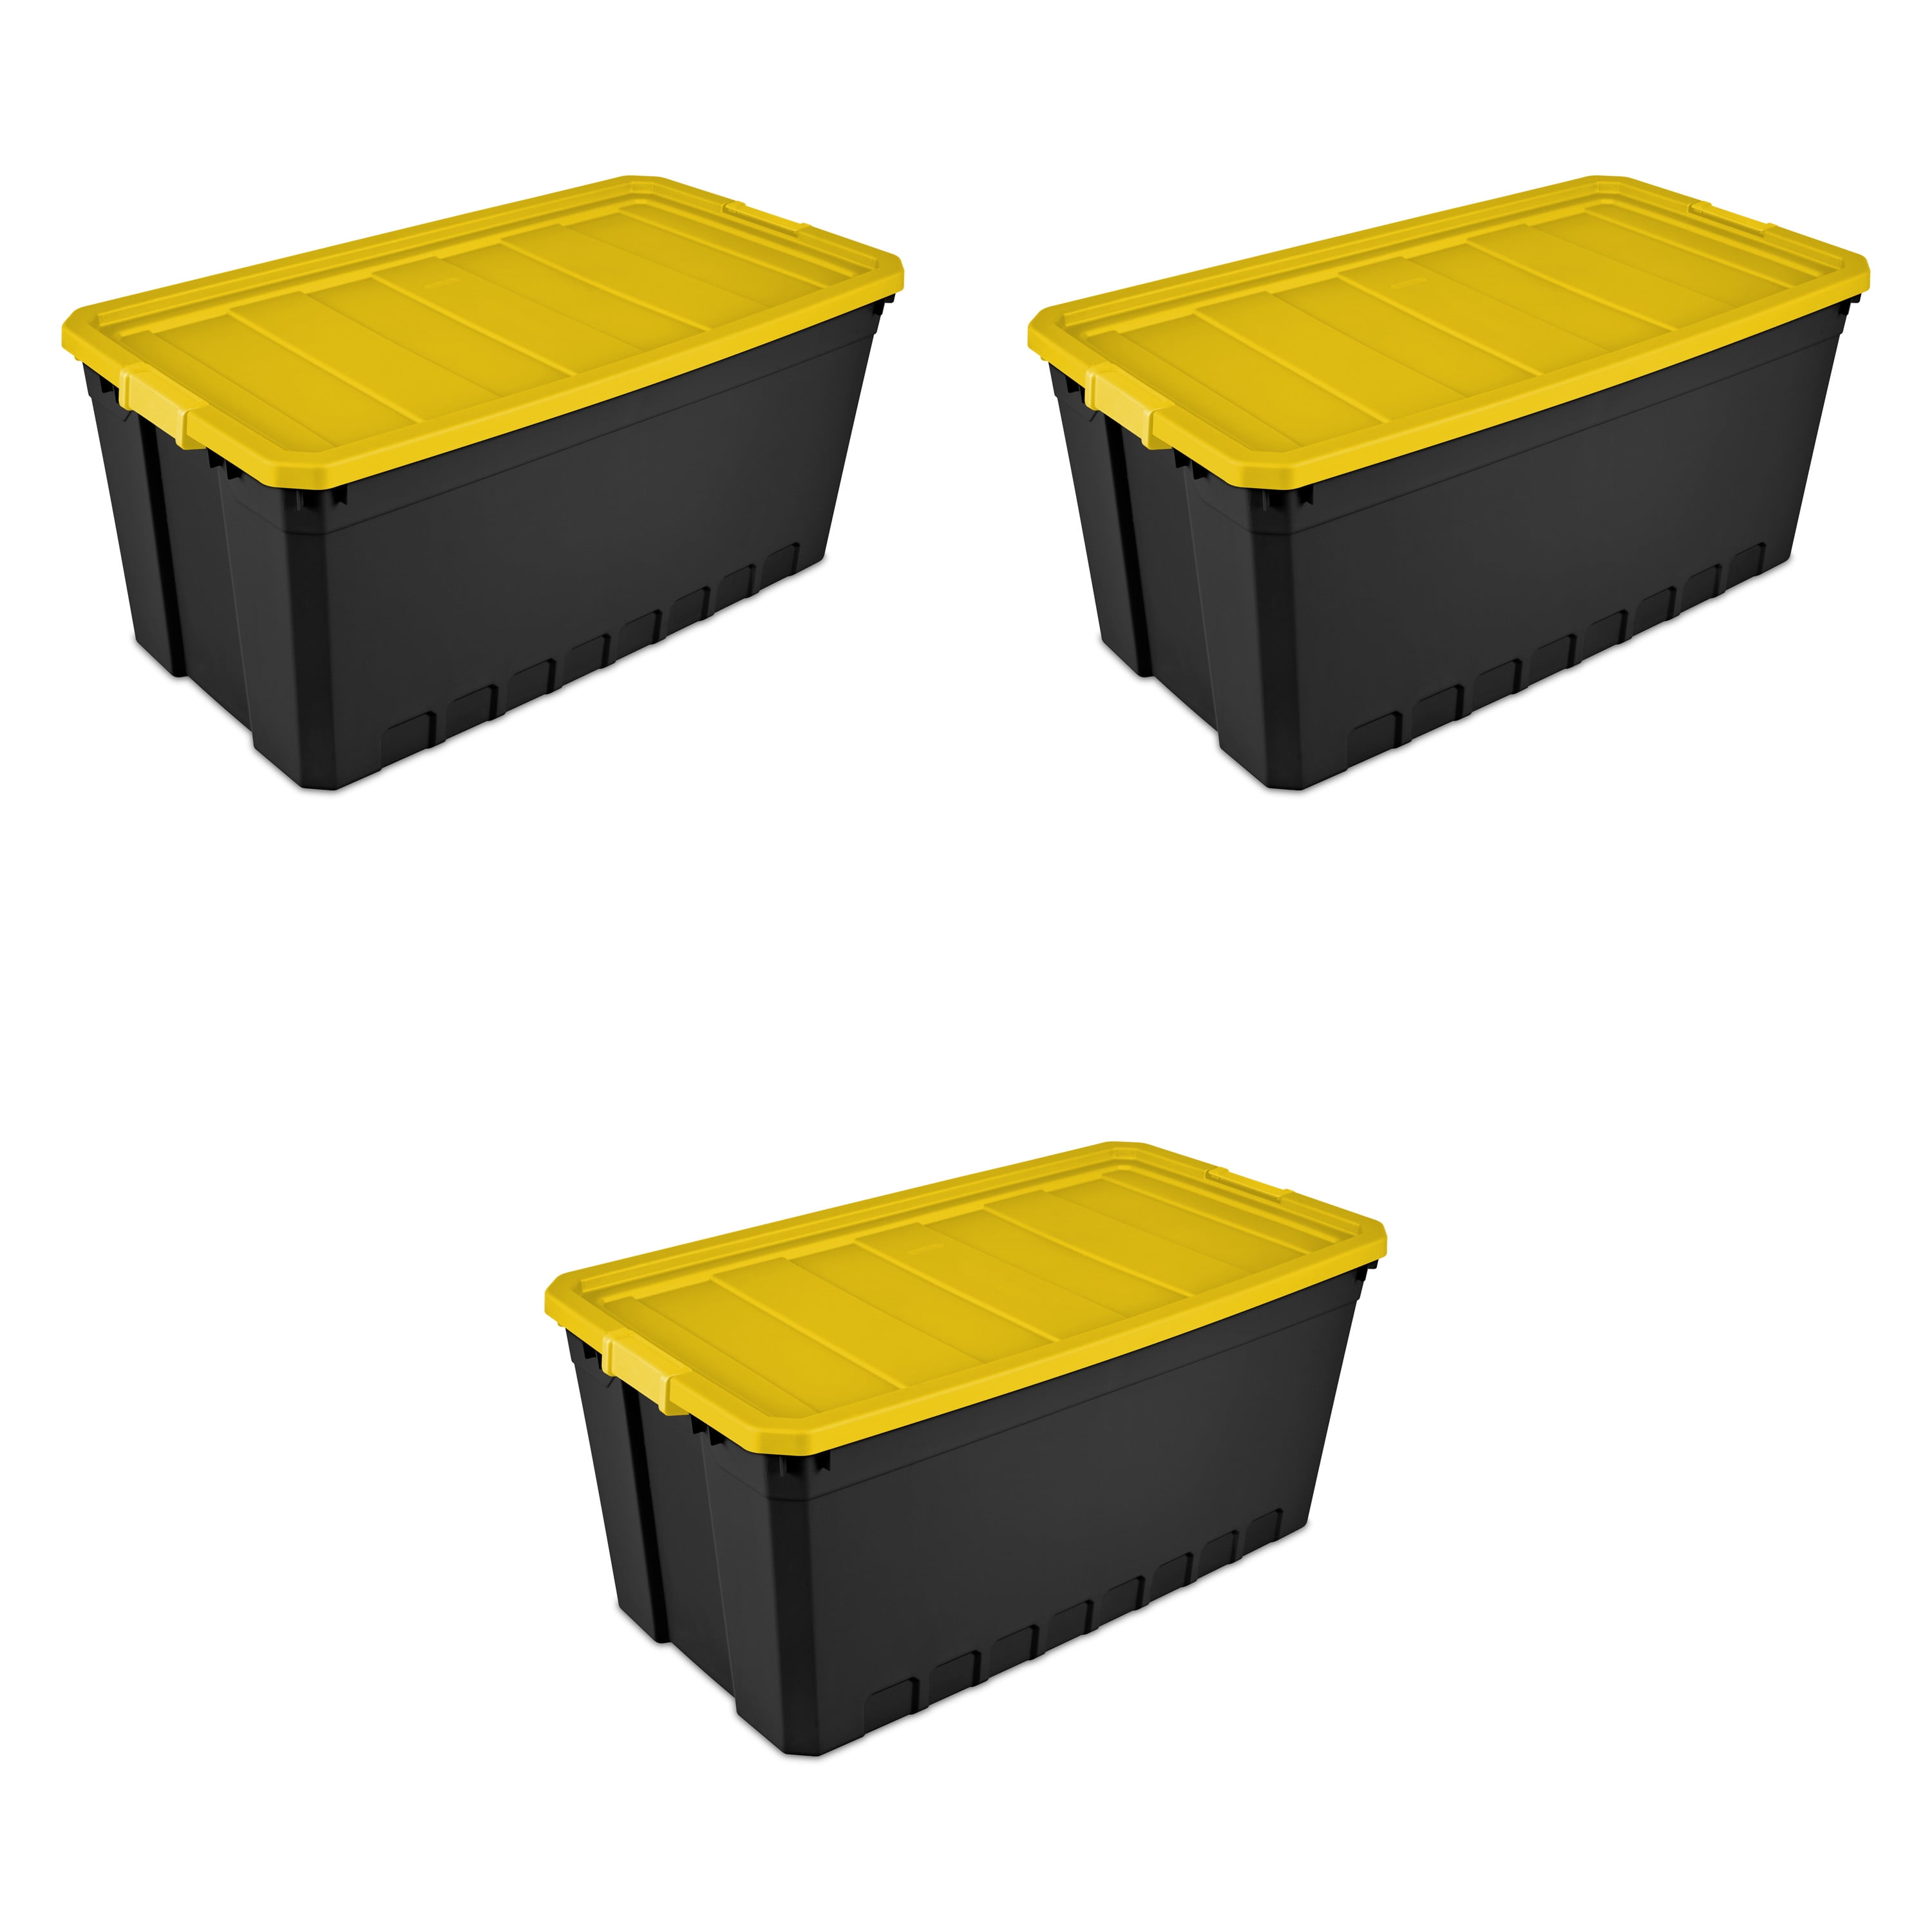 Sterilite 4 Gal Stacker Tote Yellow Lily Storage Container Organize Case of 6 